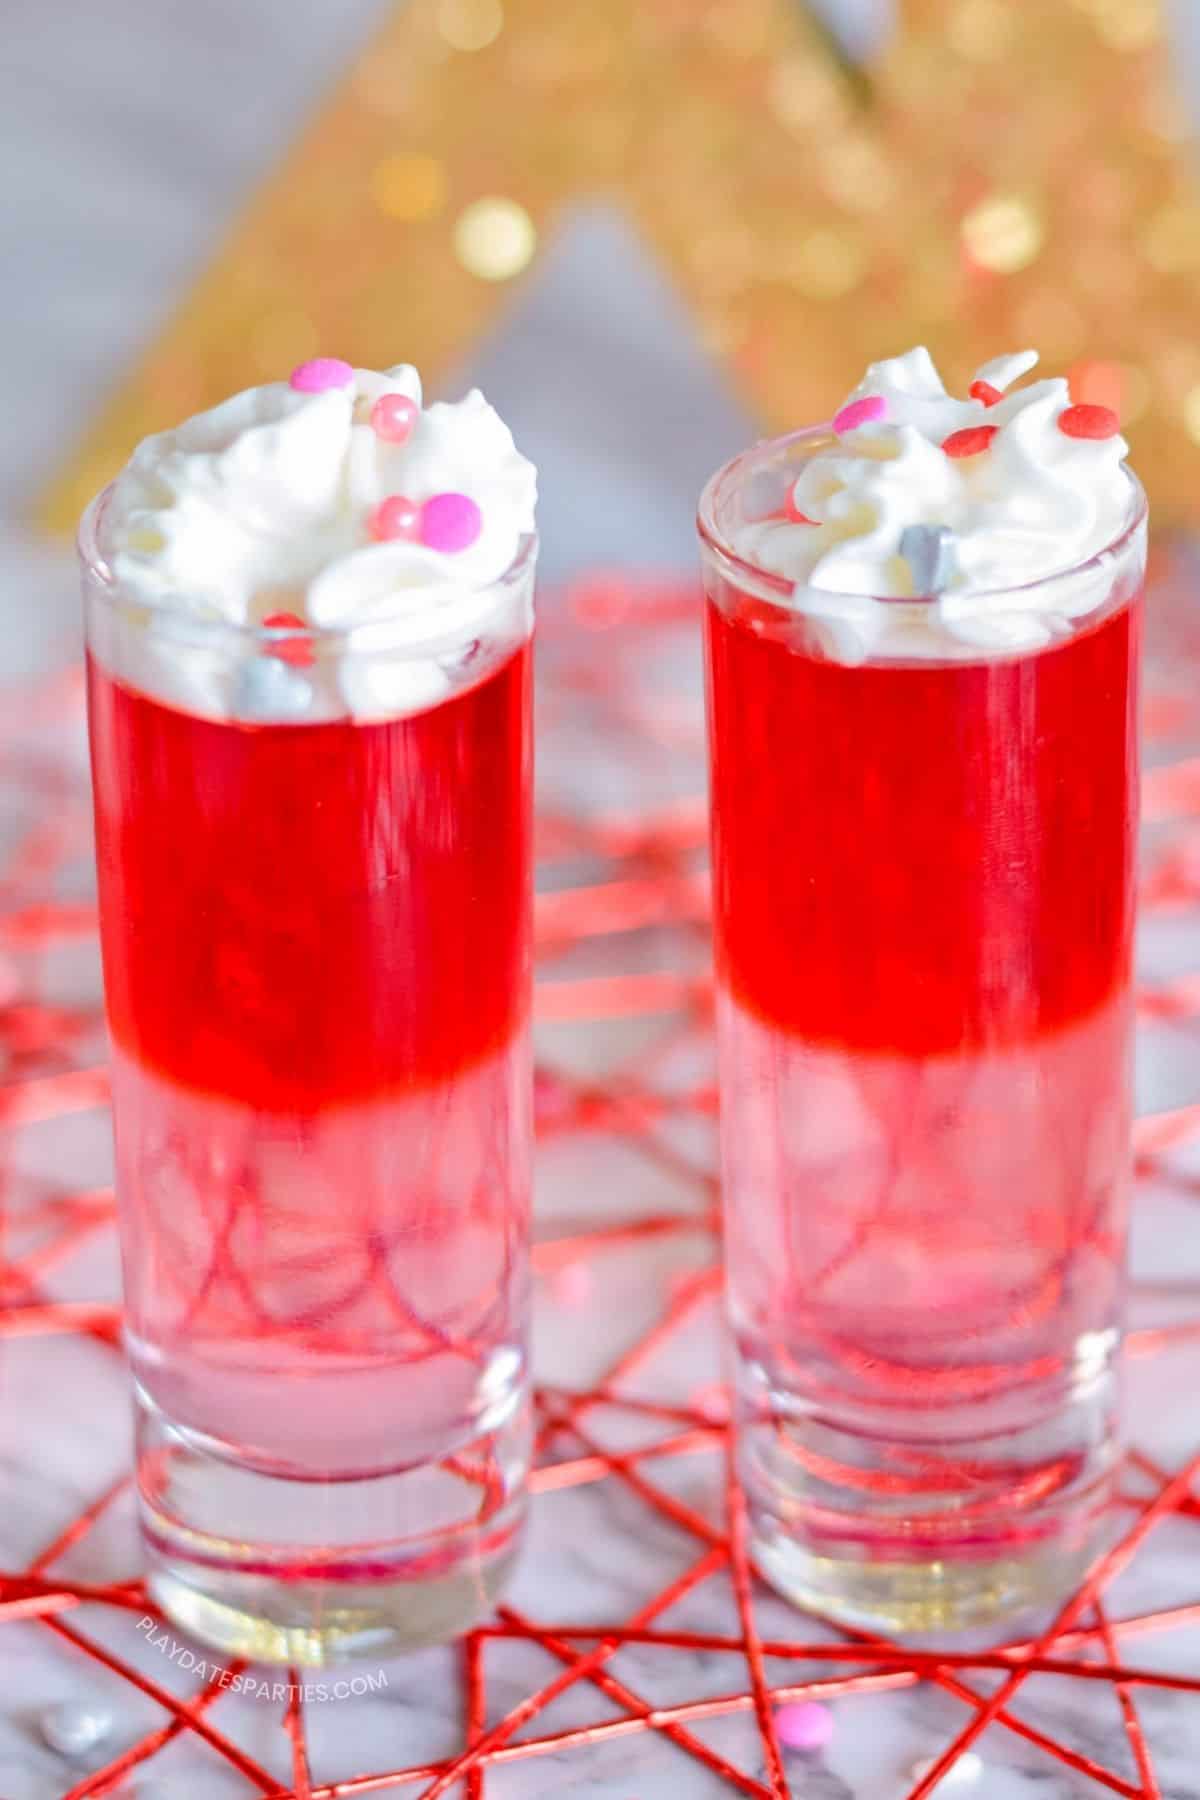 Pink and red layered Valentine's Day jello shots with whipped cream.